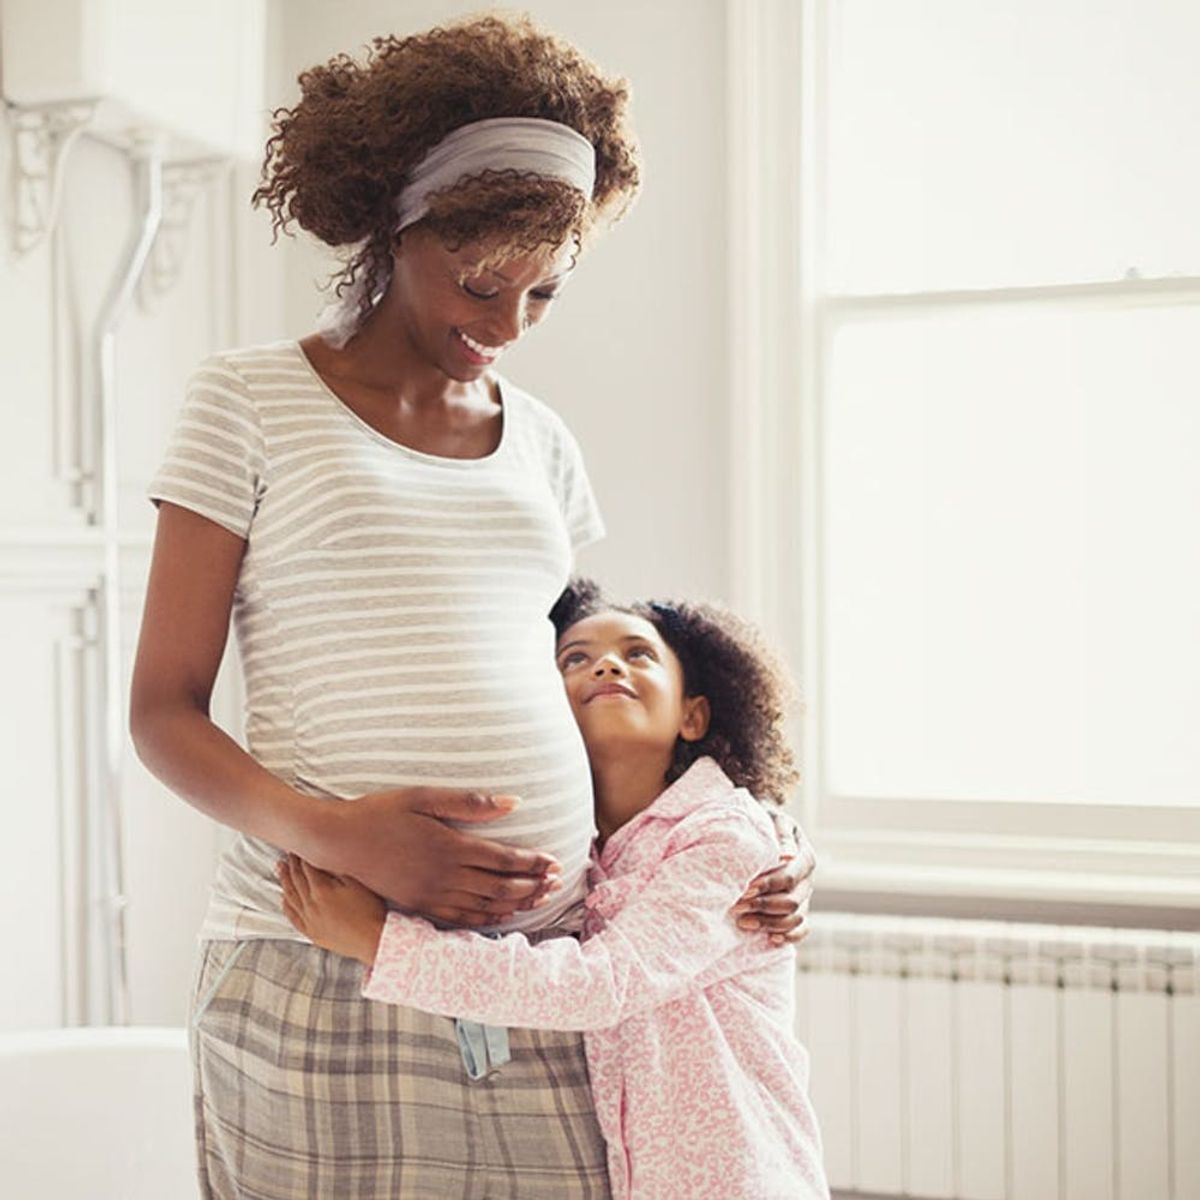 9 Women Share Why They Decided to Become a Mother